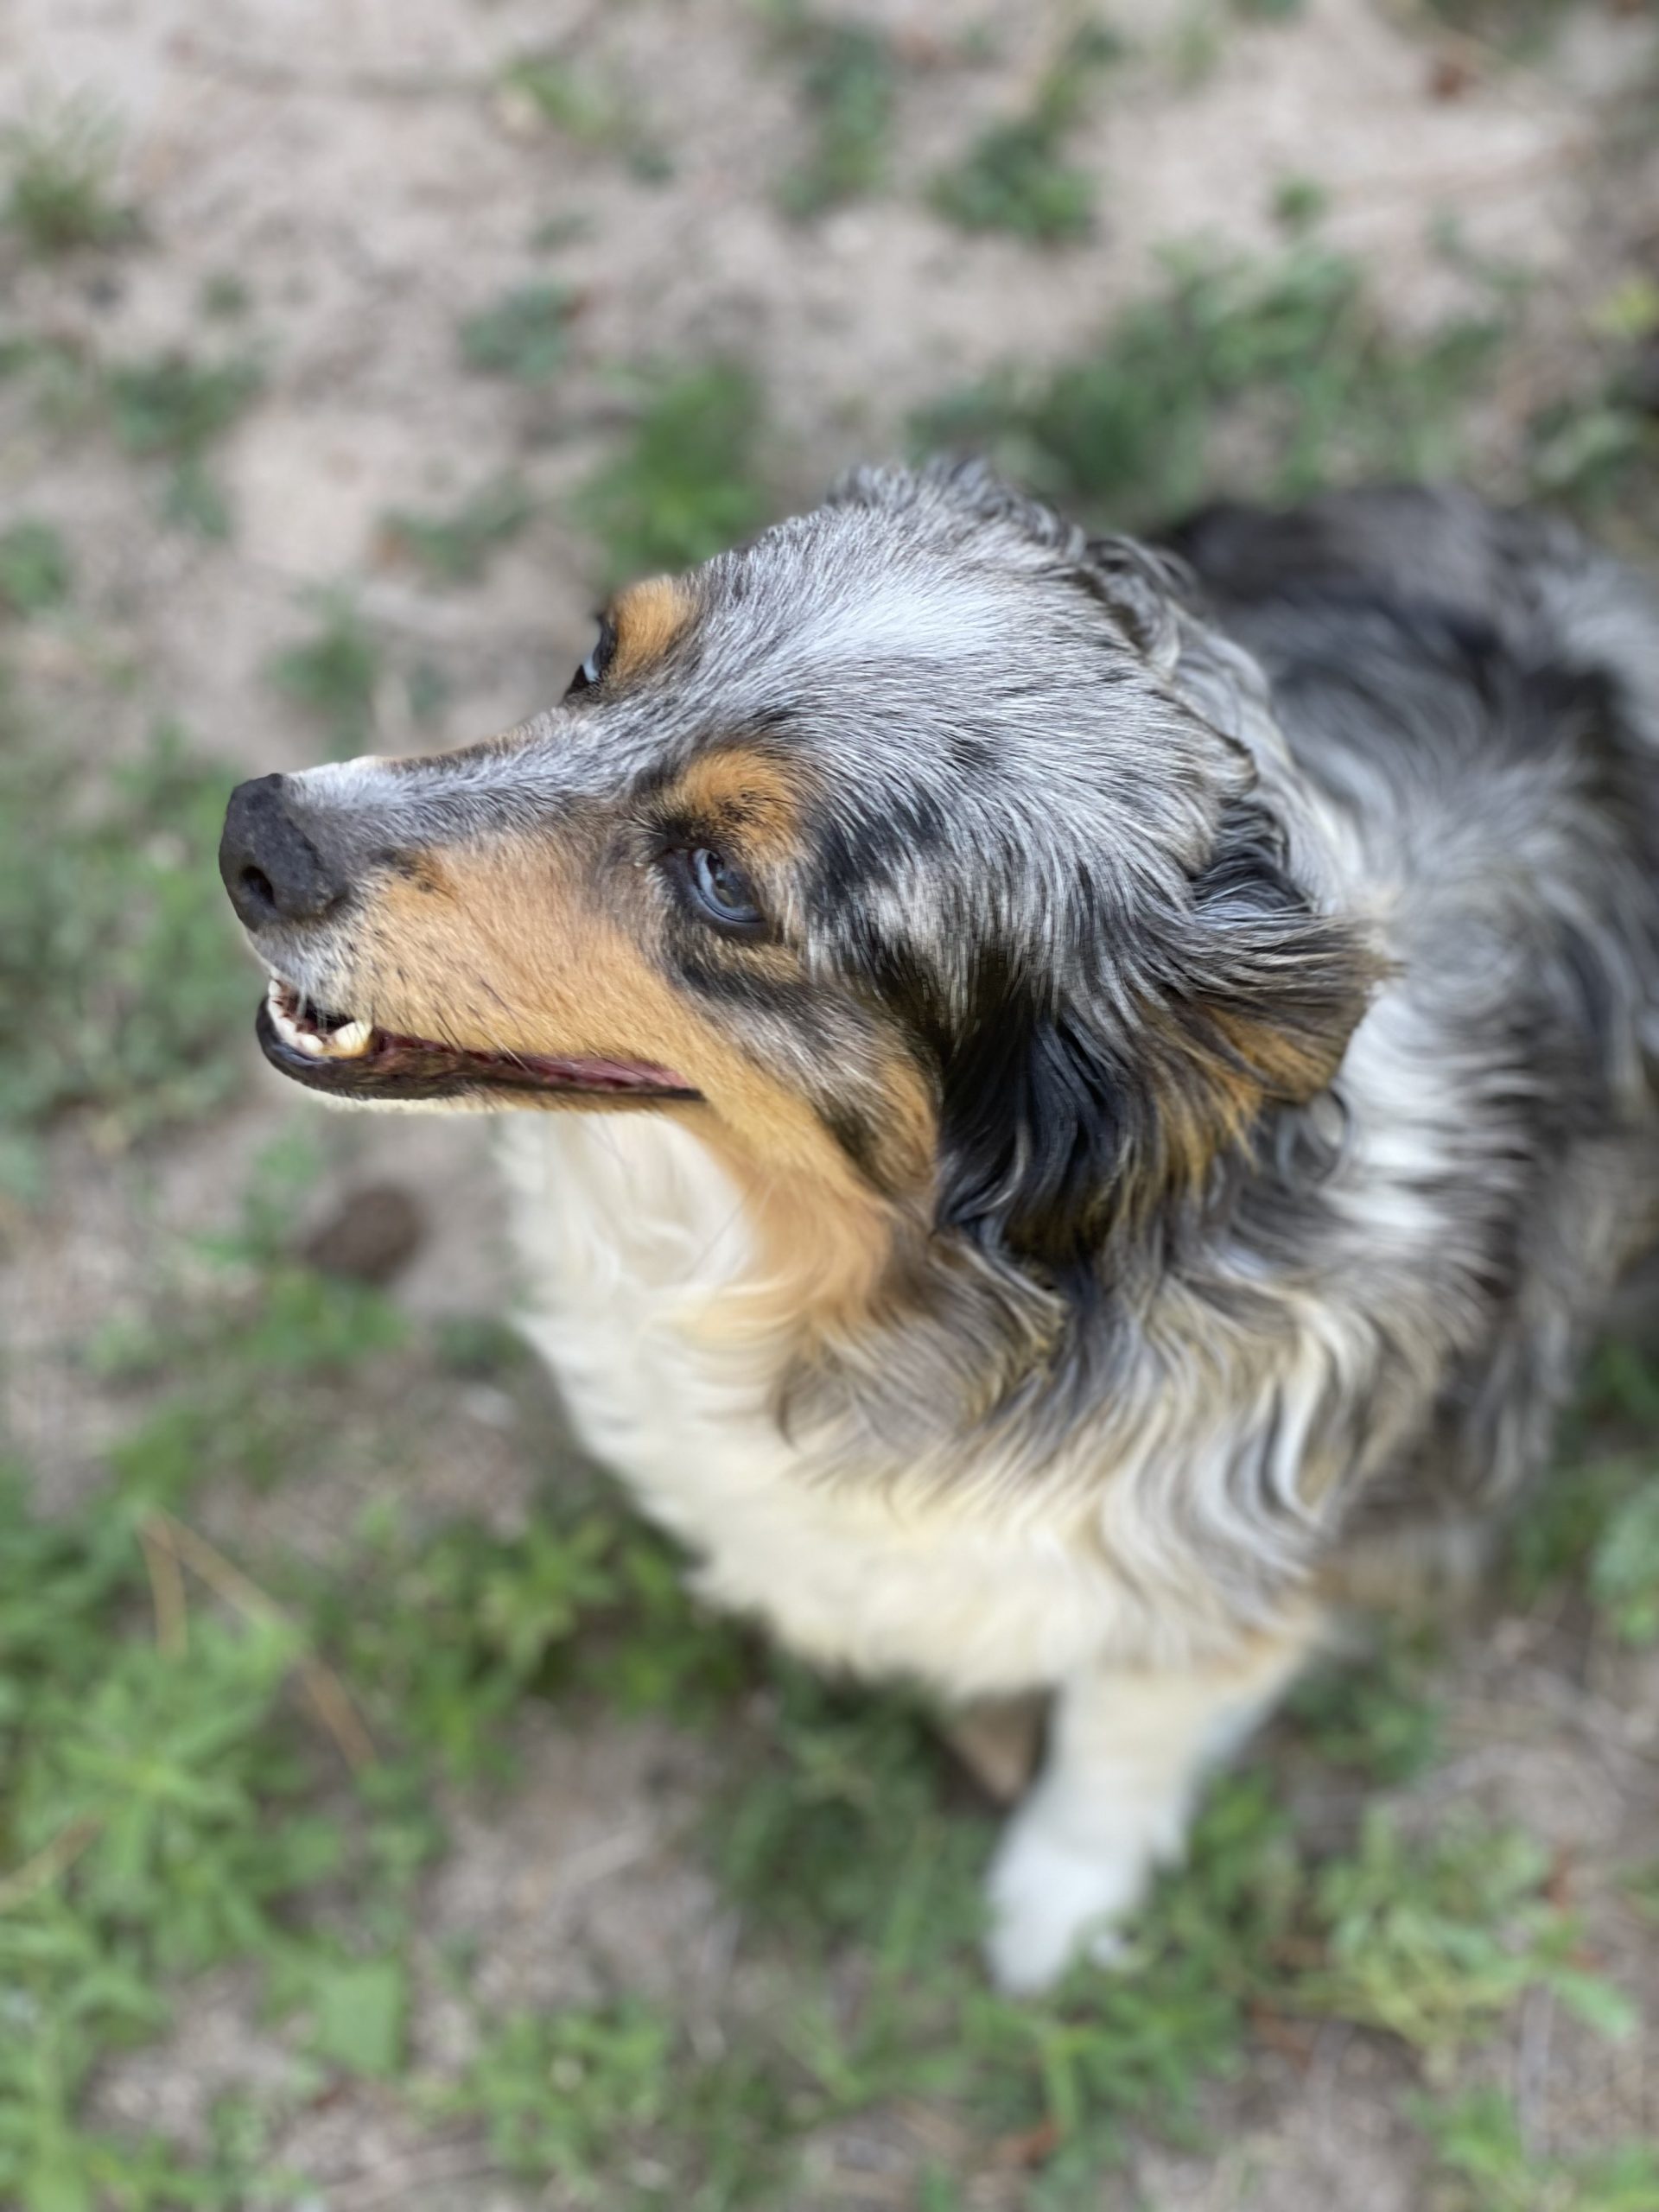 image-of-a-miniature-aussie-for-blog-about-arthritis-in-dogs